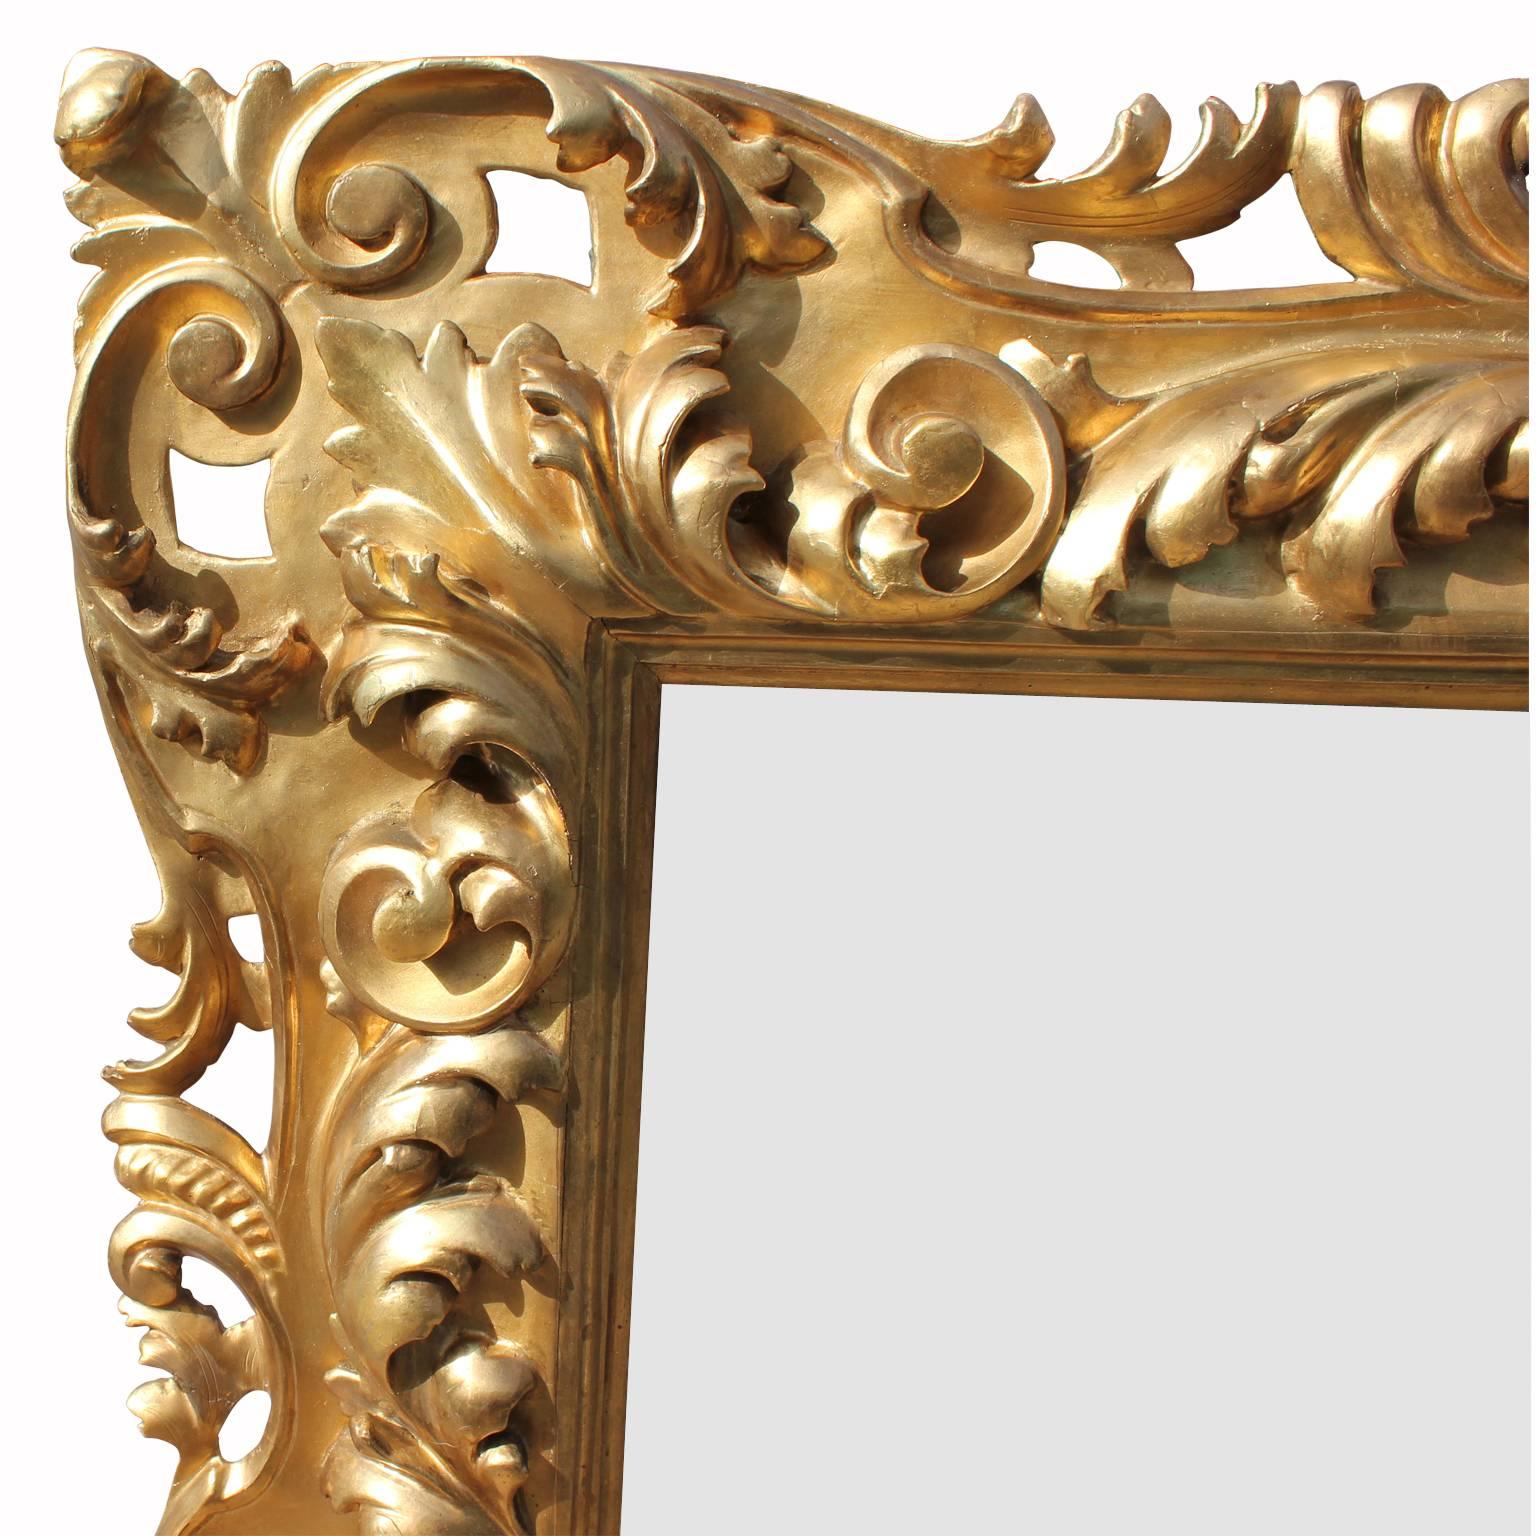 18th or 19th Century Ornate French Gold Giltwood Carved Mirror 1